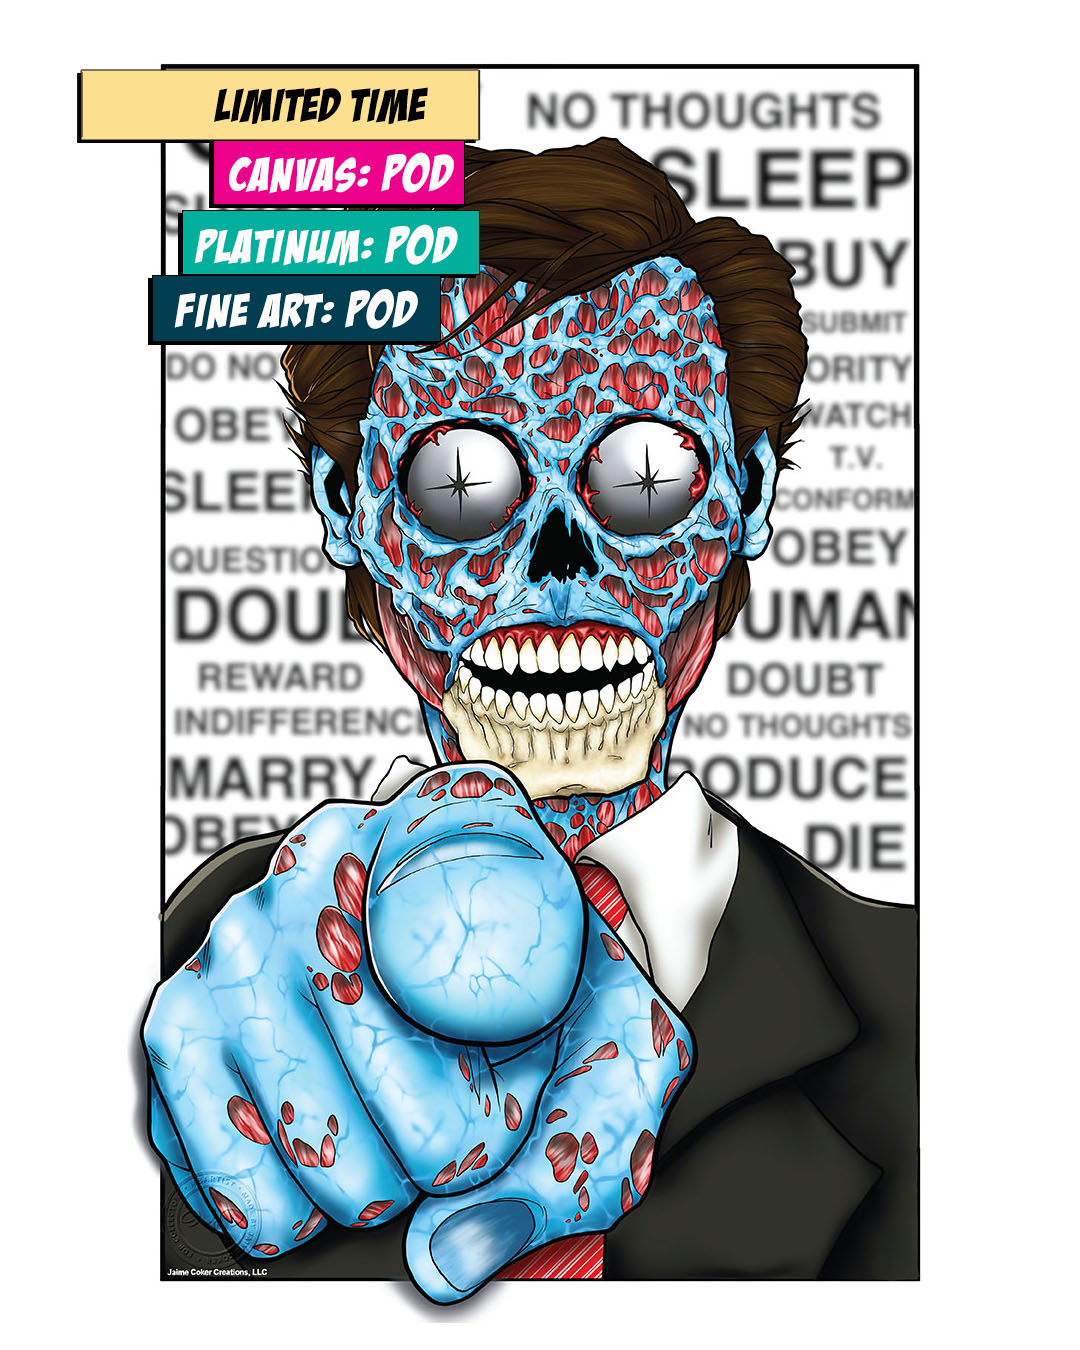 THEY LIVE: OBEY